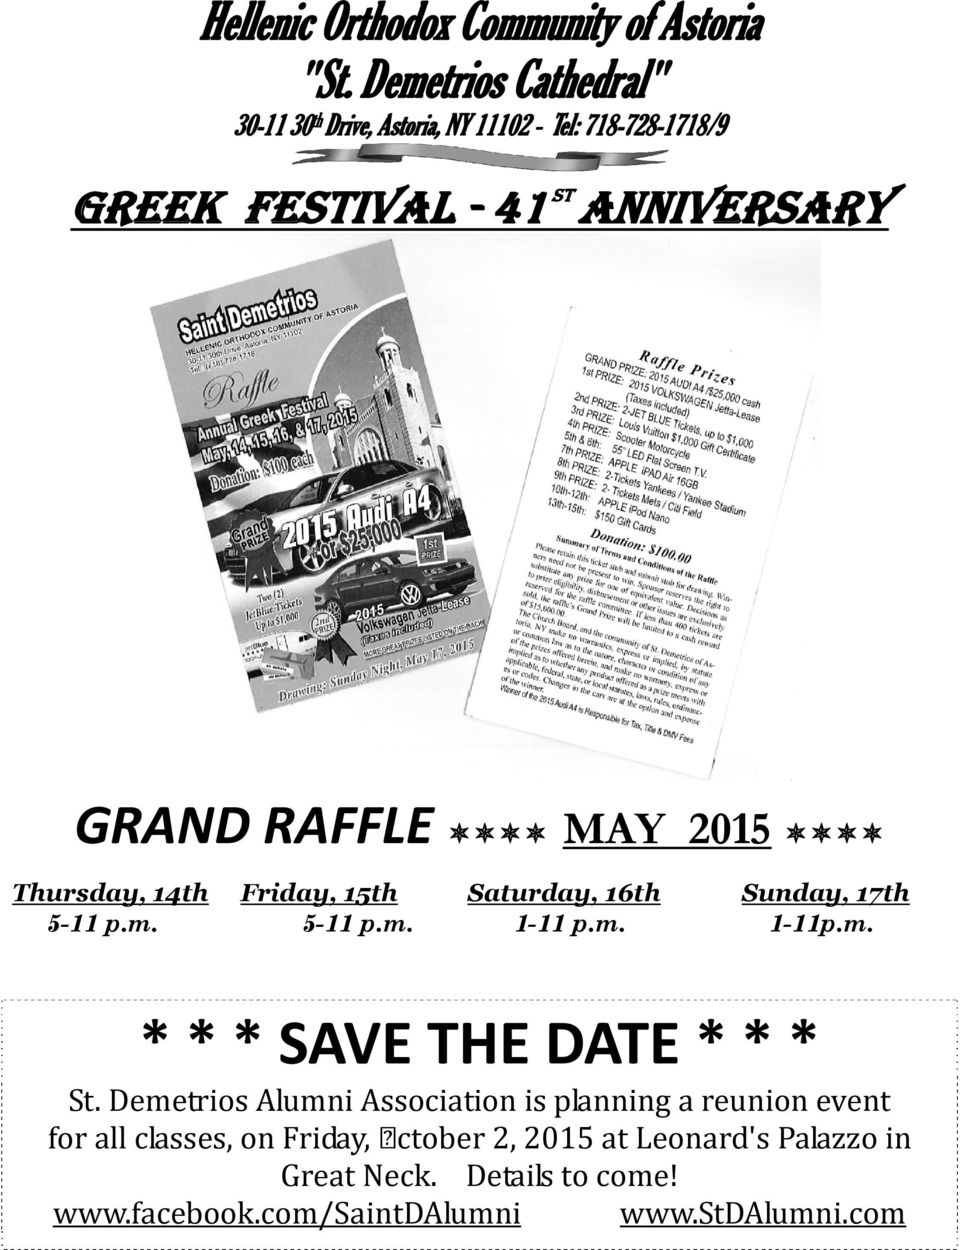 RAFFLE MAY 2015 Thursday, 14th Friday, 15th Saturday, 16th Sunday, 17th 5-11 p.m. 5-11 p.m. 1-11 p.m. 1-11p.m. * * * SAVE THE DATE * * * St.